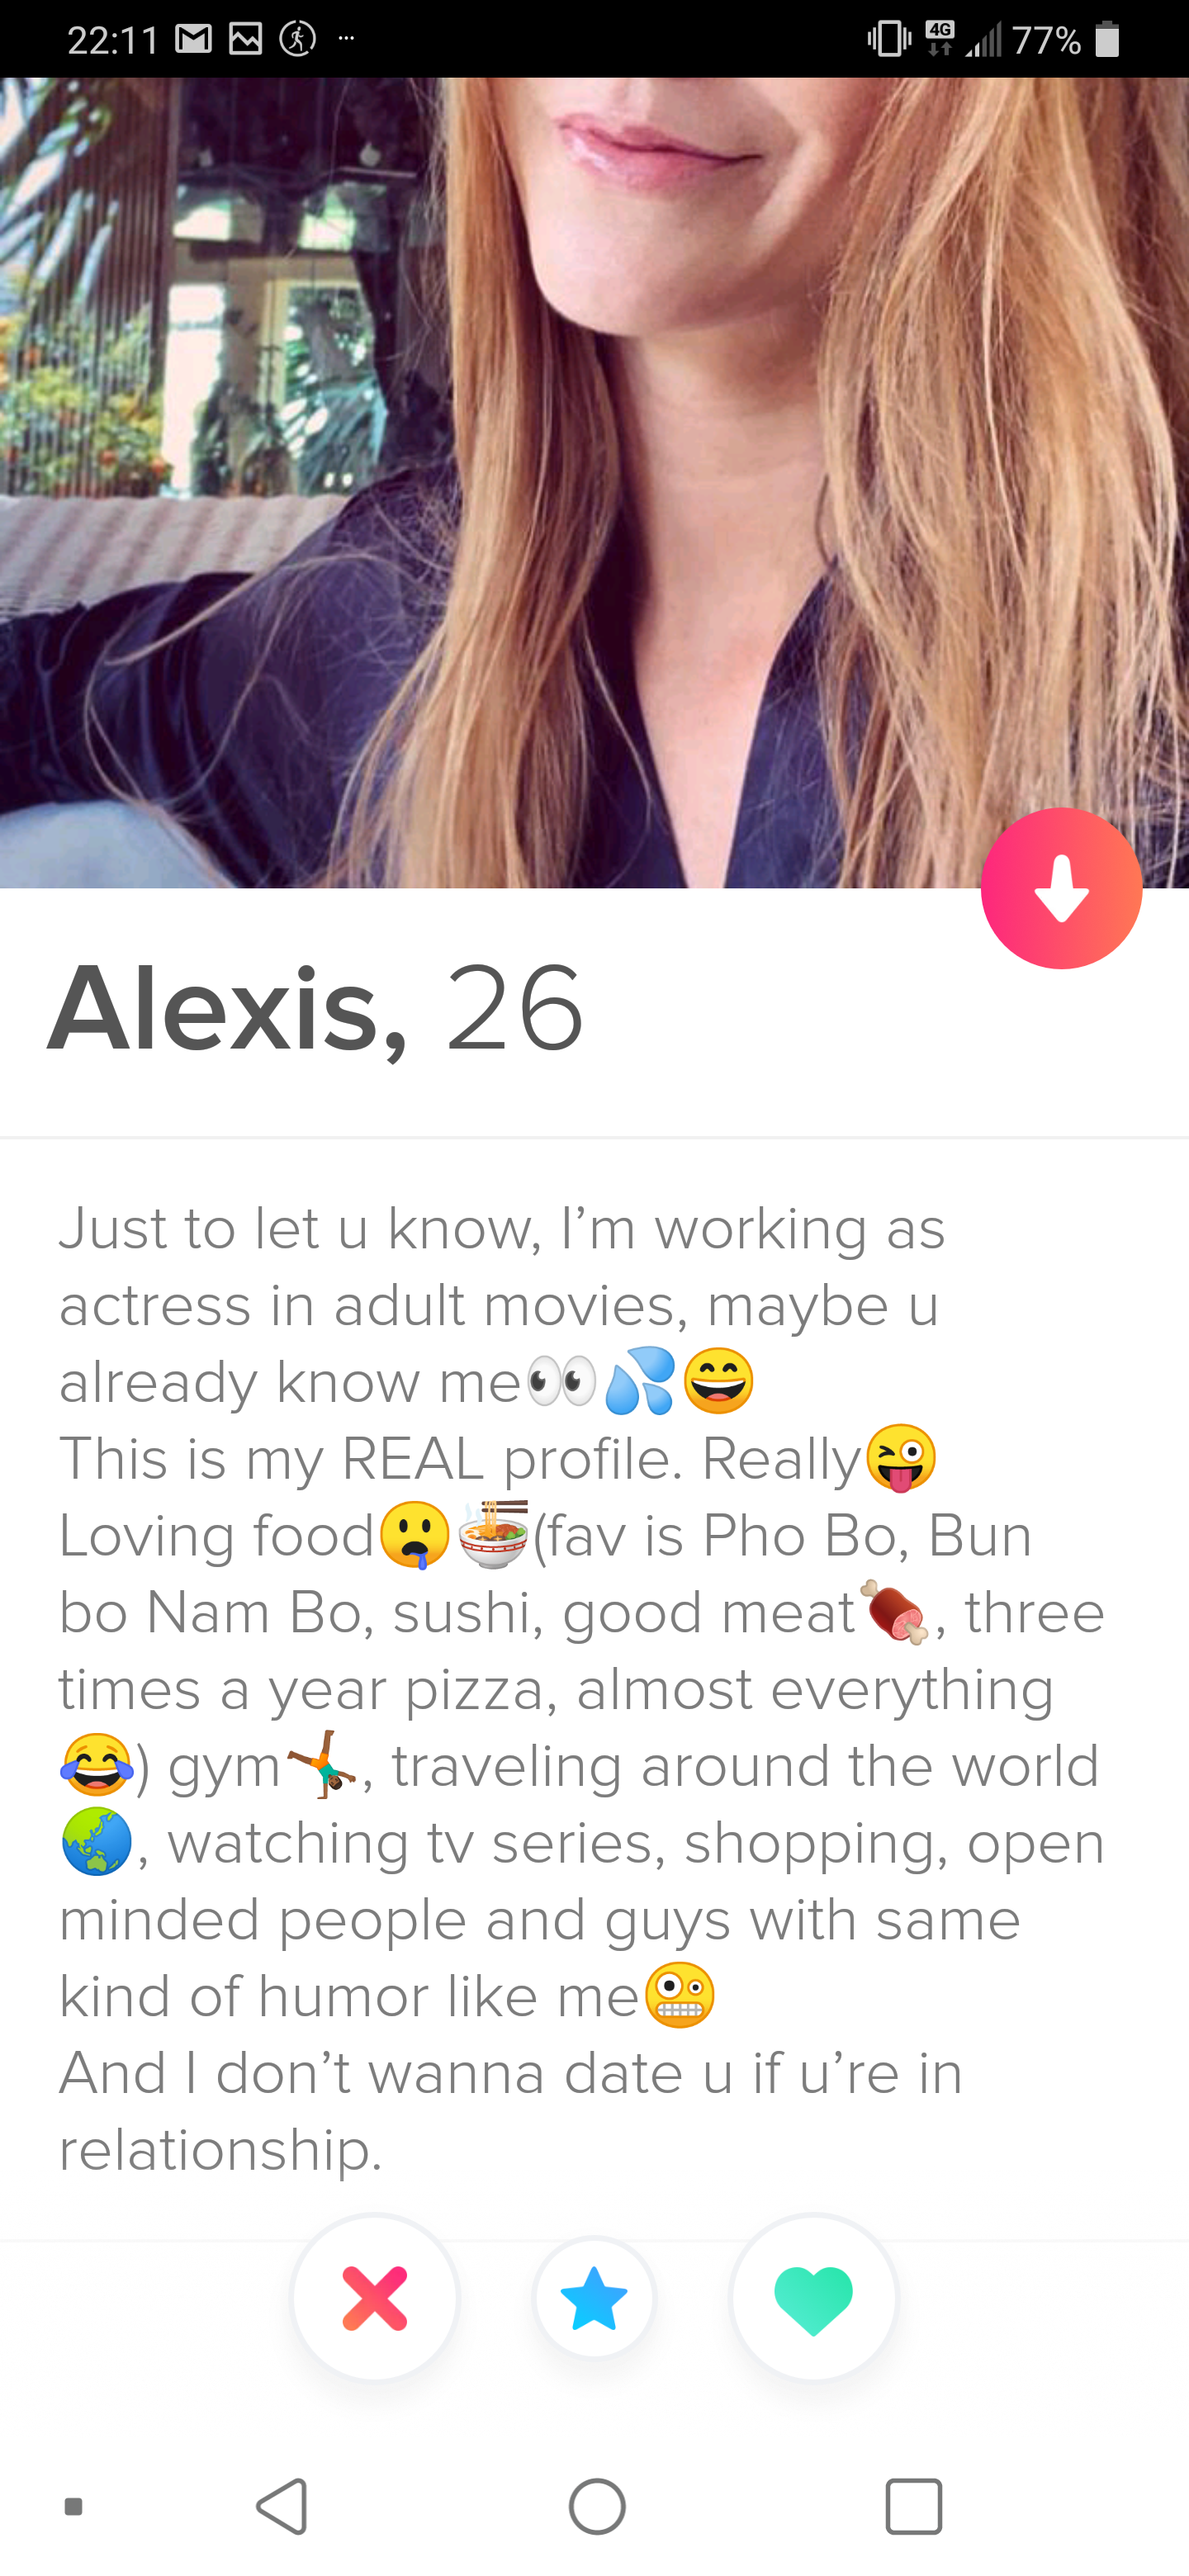 tinder - media - Alexis, 26 Just to let u know, I'm working as actress in adult movies, maybe u already know me.. This is my Real profile. Reallye Loving food fav is Pho Bo. Bun bo Nam Bo, sushl, good meat , three times a year pizza, almost everything gym